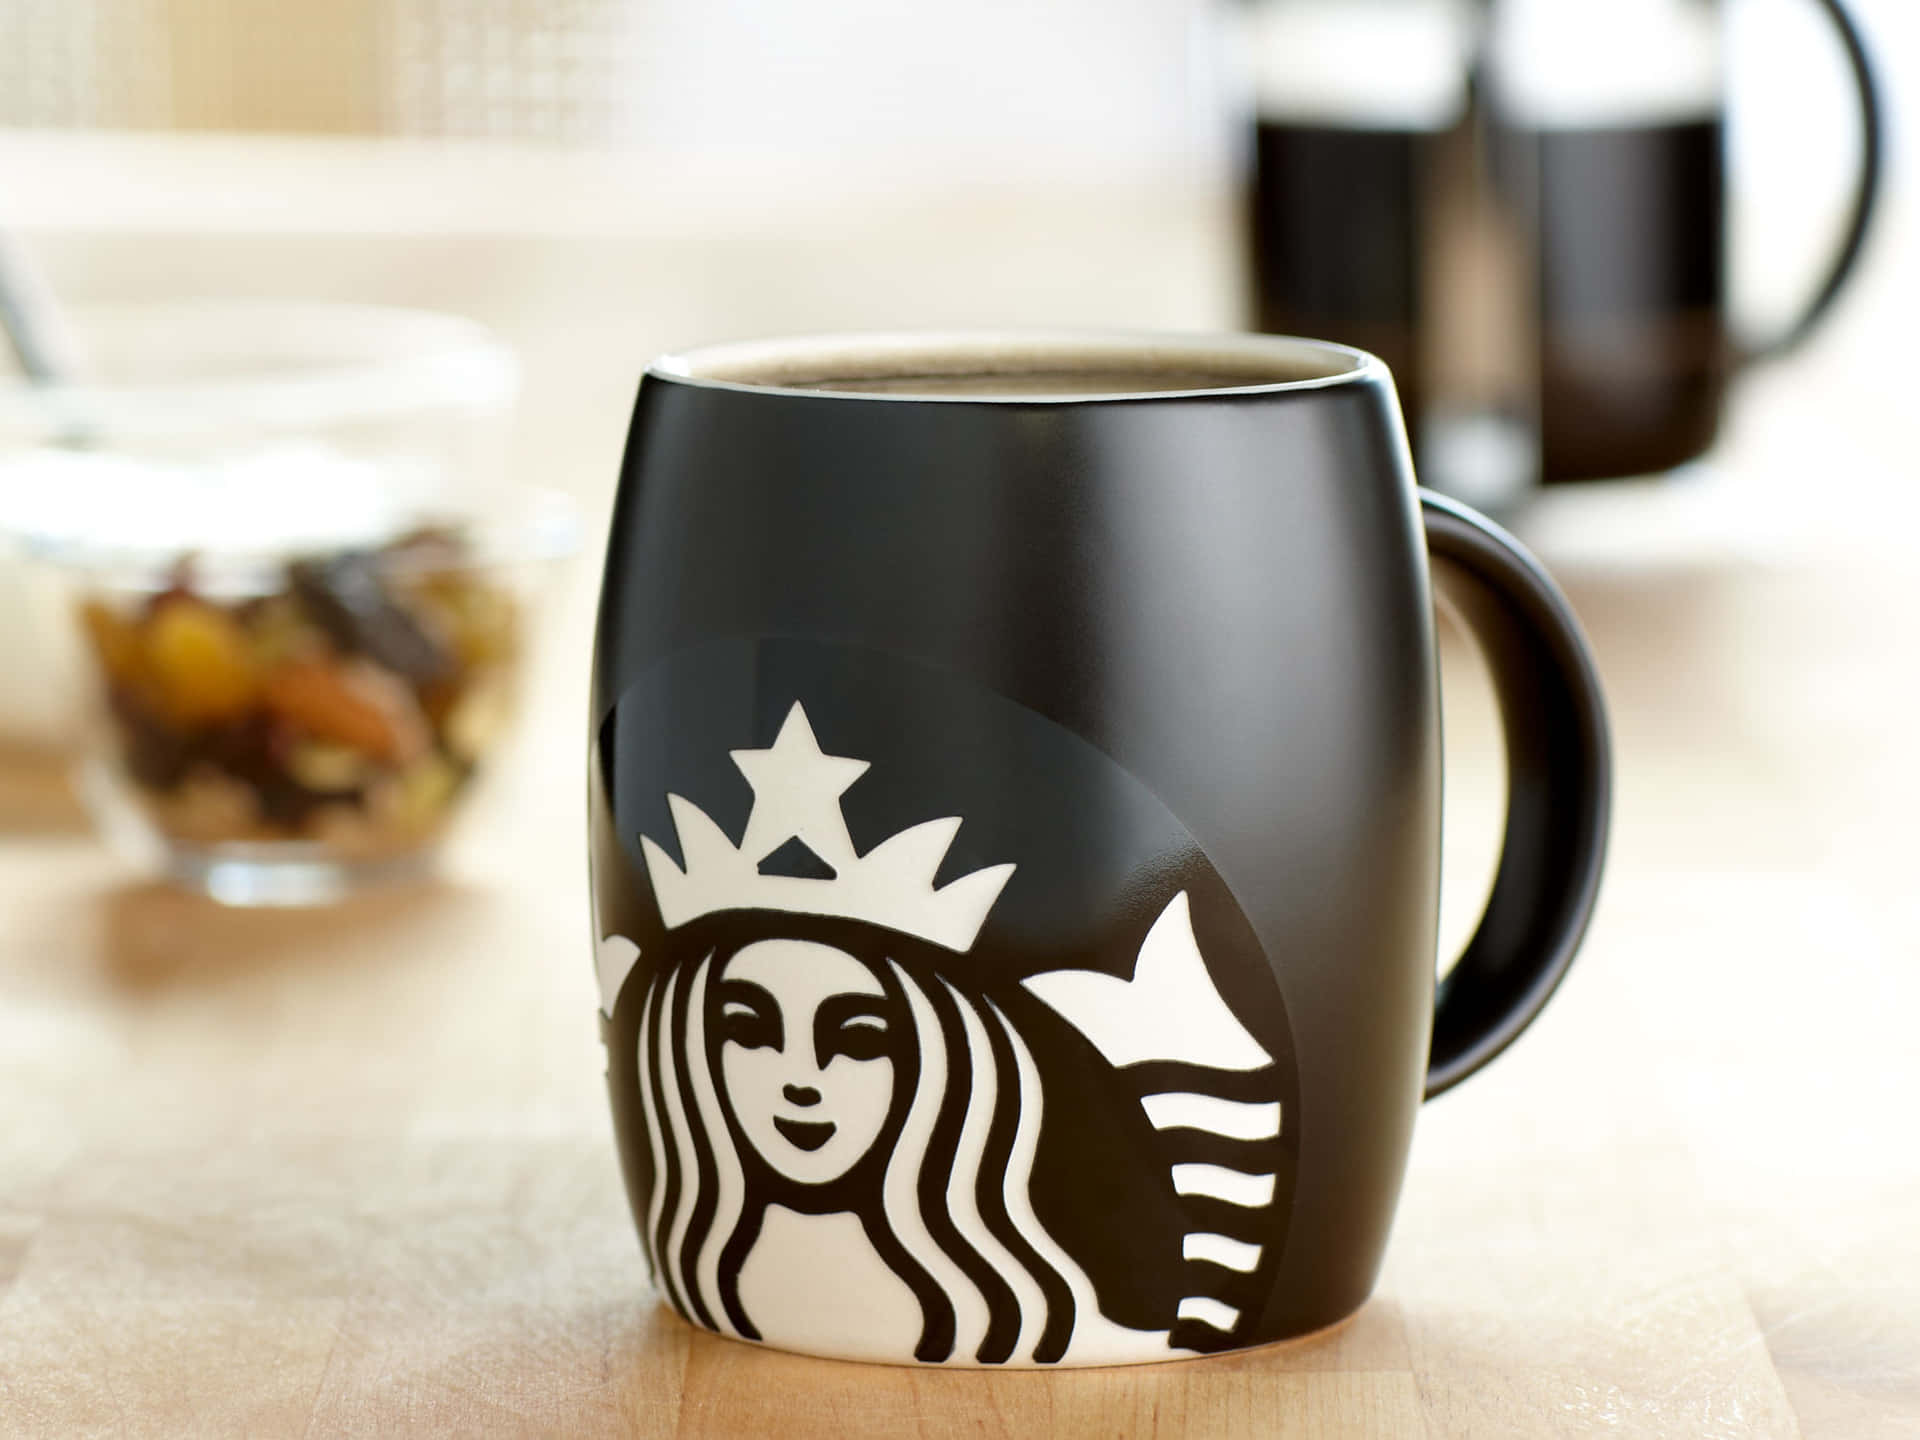 Enjoy the perfect cup of coffee with a classic Starbucks experience